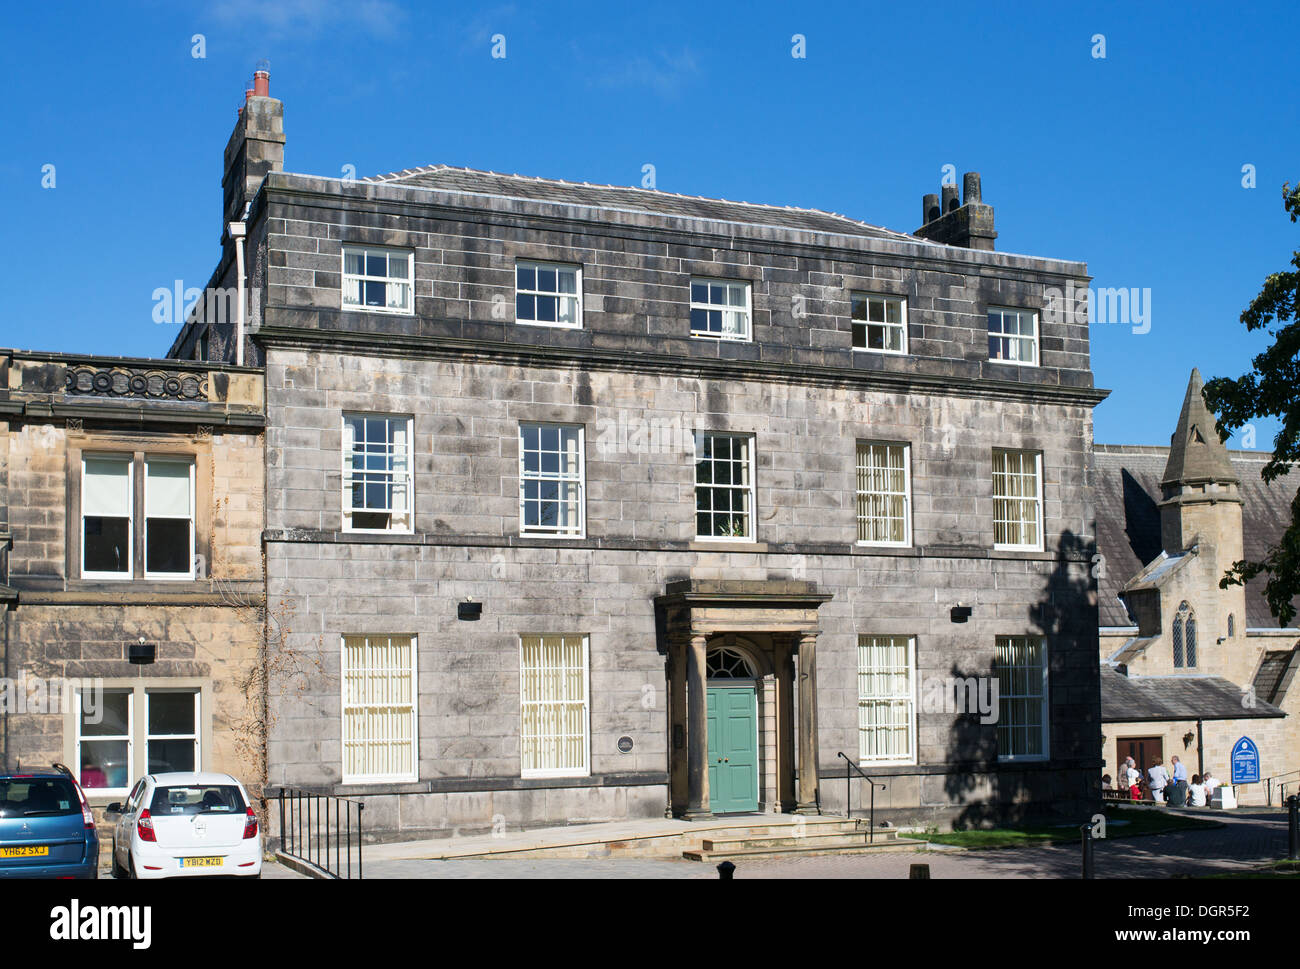 The 18th century Manor House in Otley, Yorkshire, England, UK Stock Photo